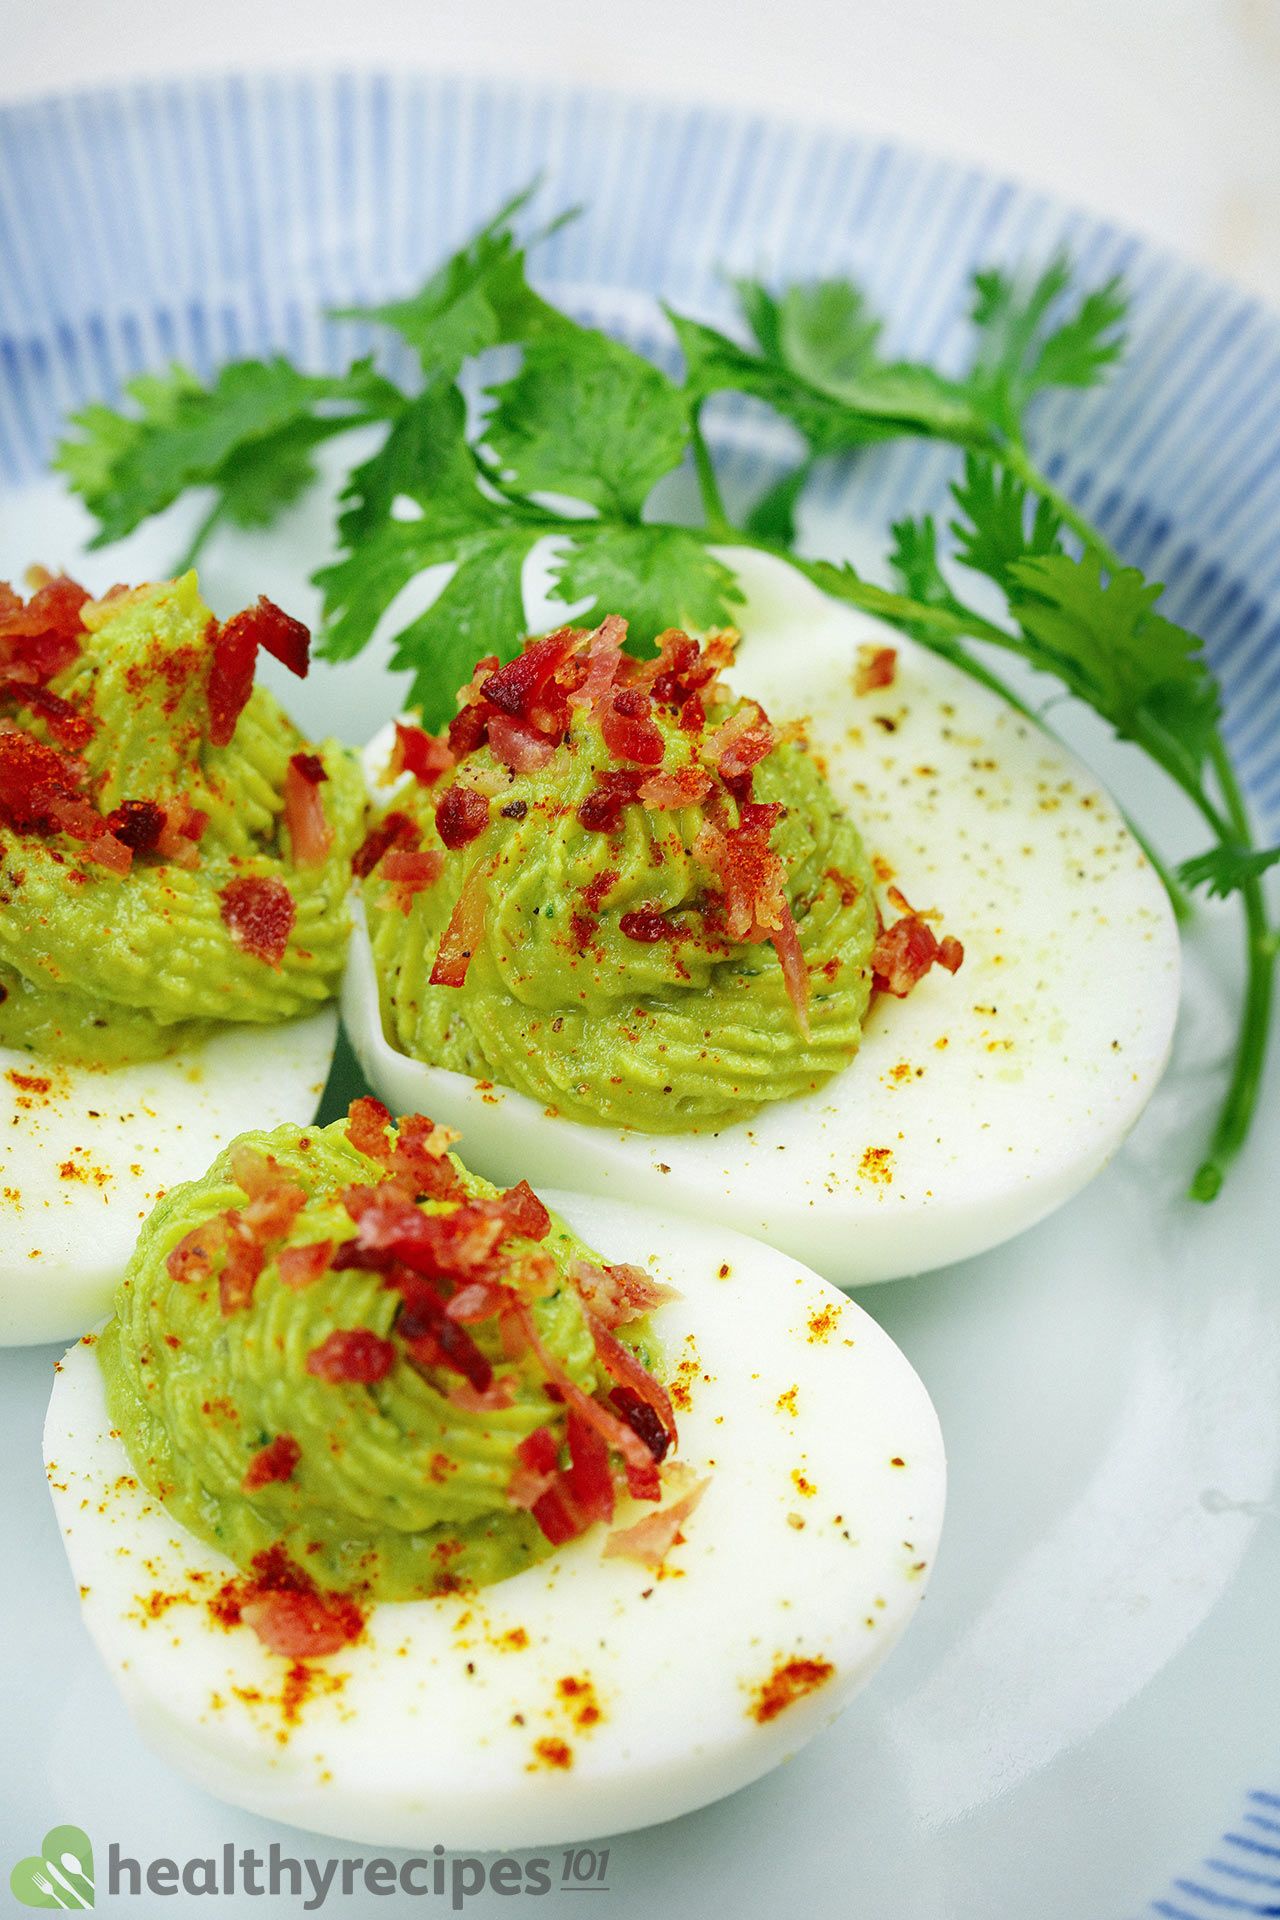 How to Prepare Ingredients for Avocado Deviled Eggs